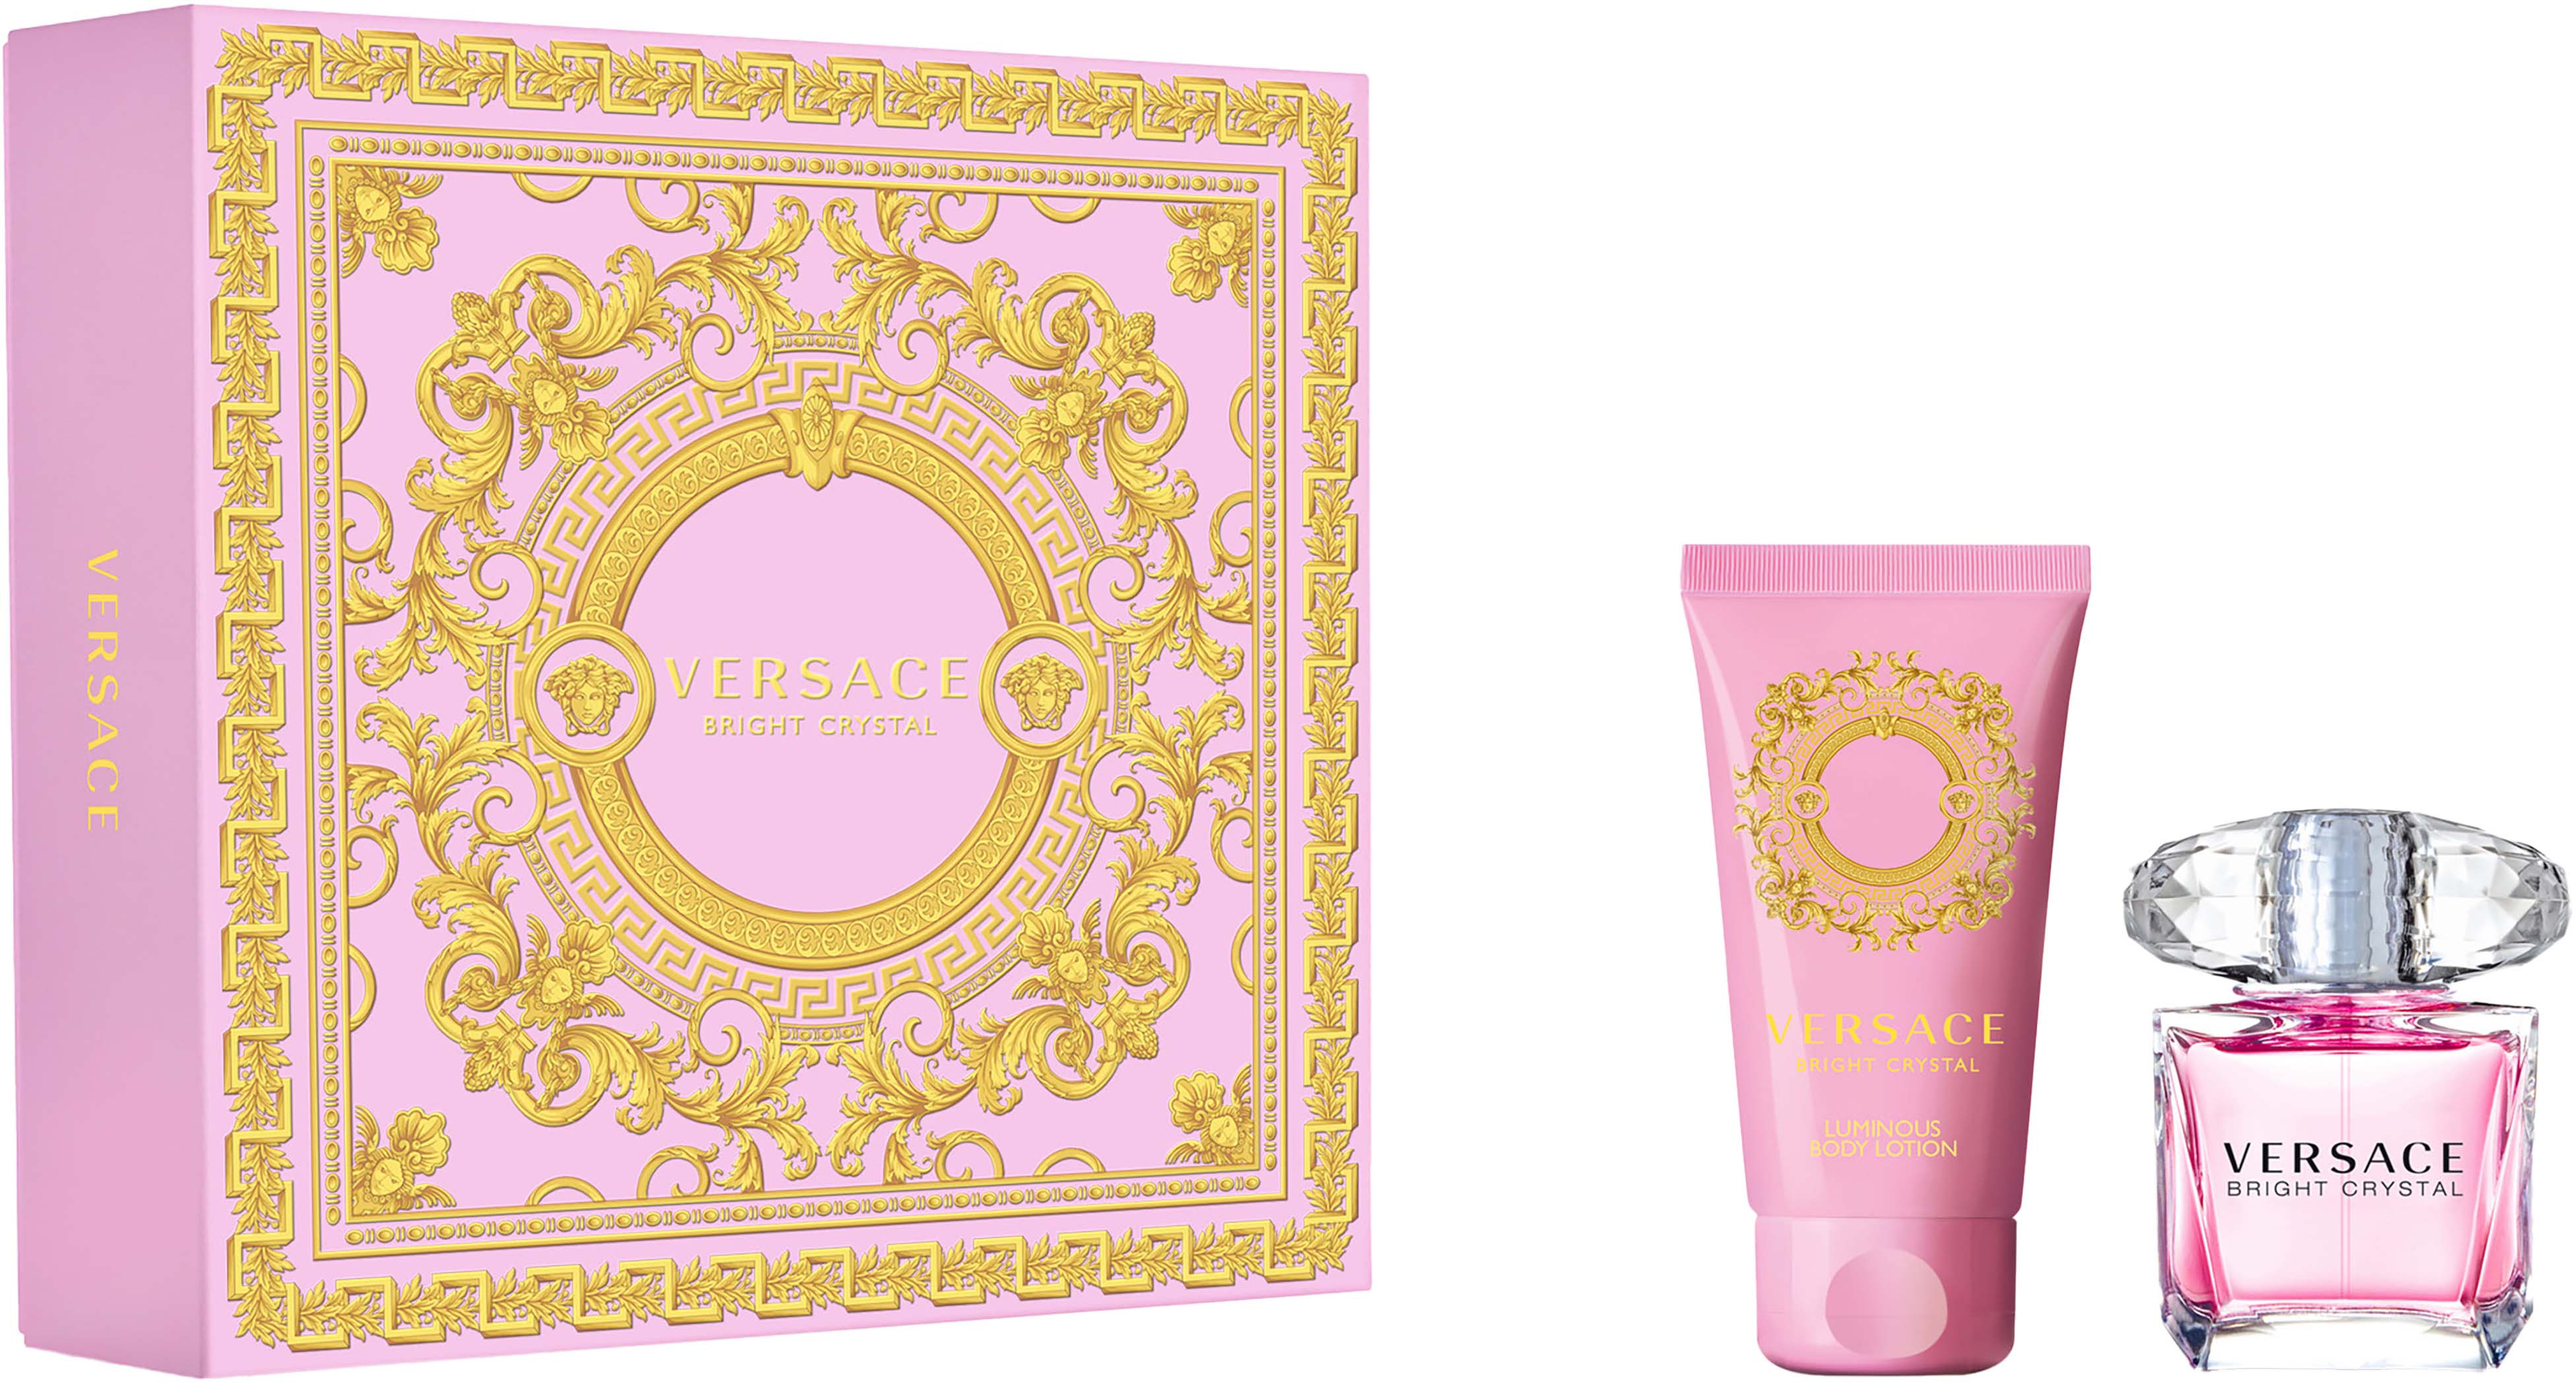 https://lyko.com/globalassets/product-images/versace-bright-crystal-gift-set-1323-376-0000_1.jpg?ref=50E19474AE